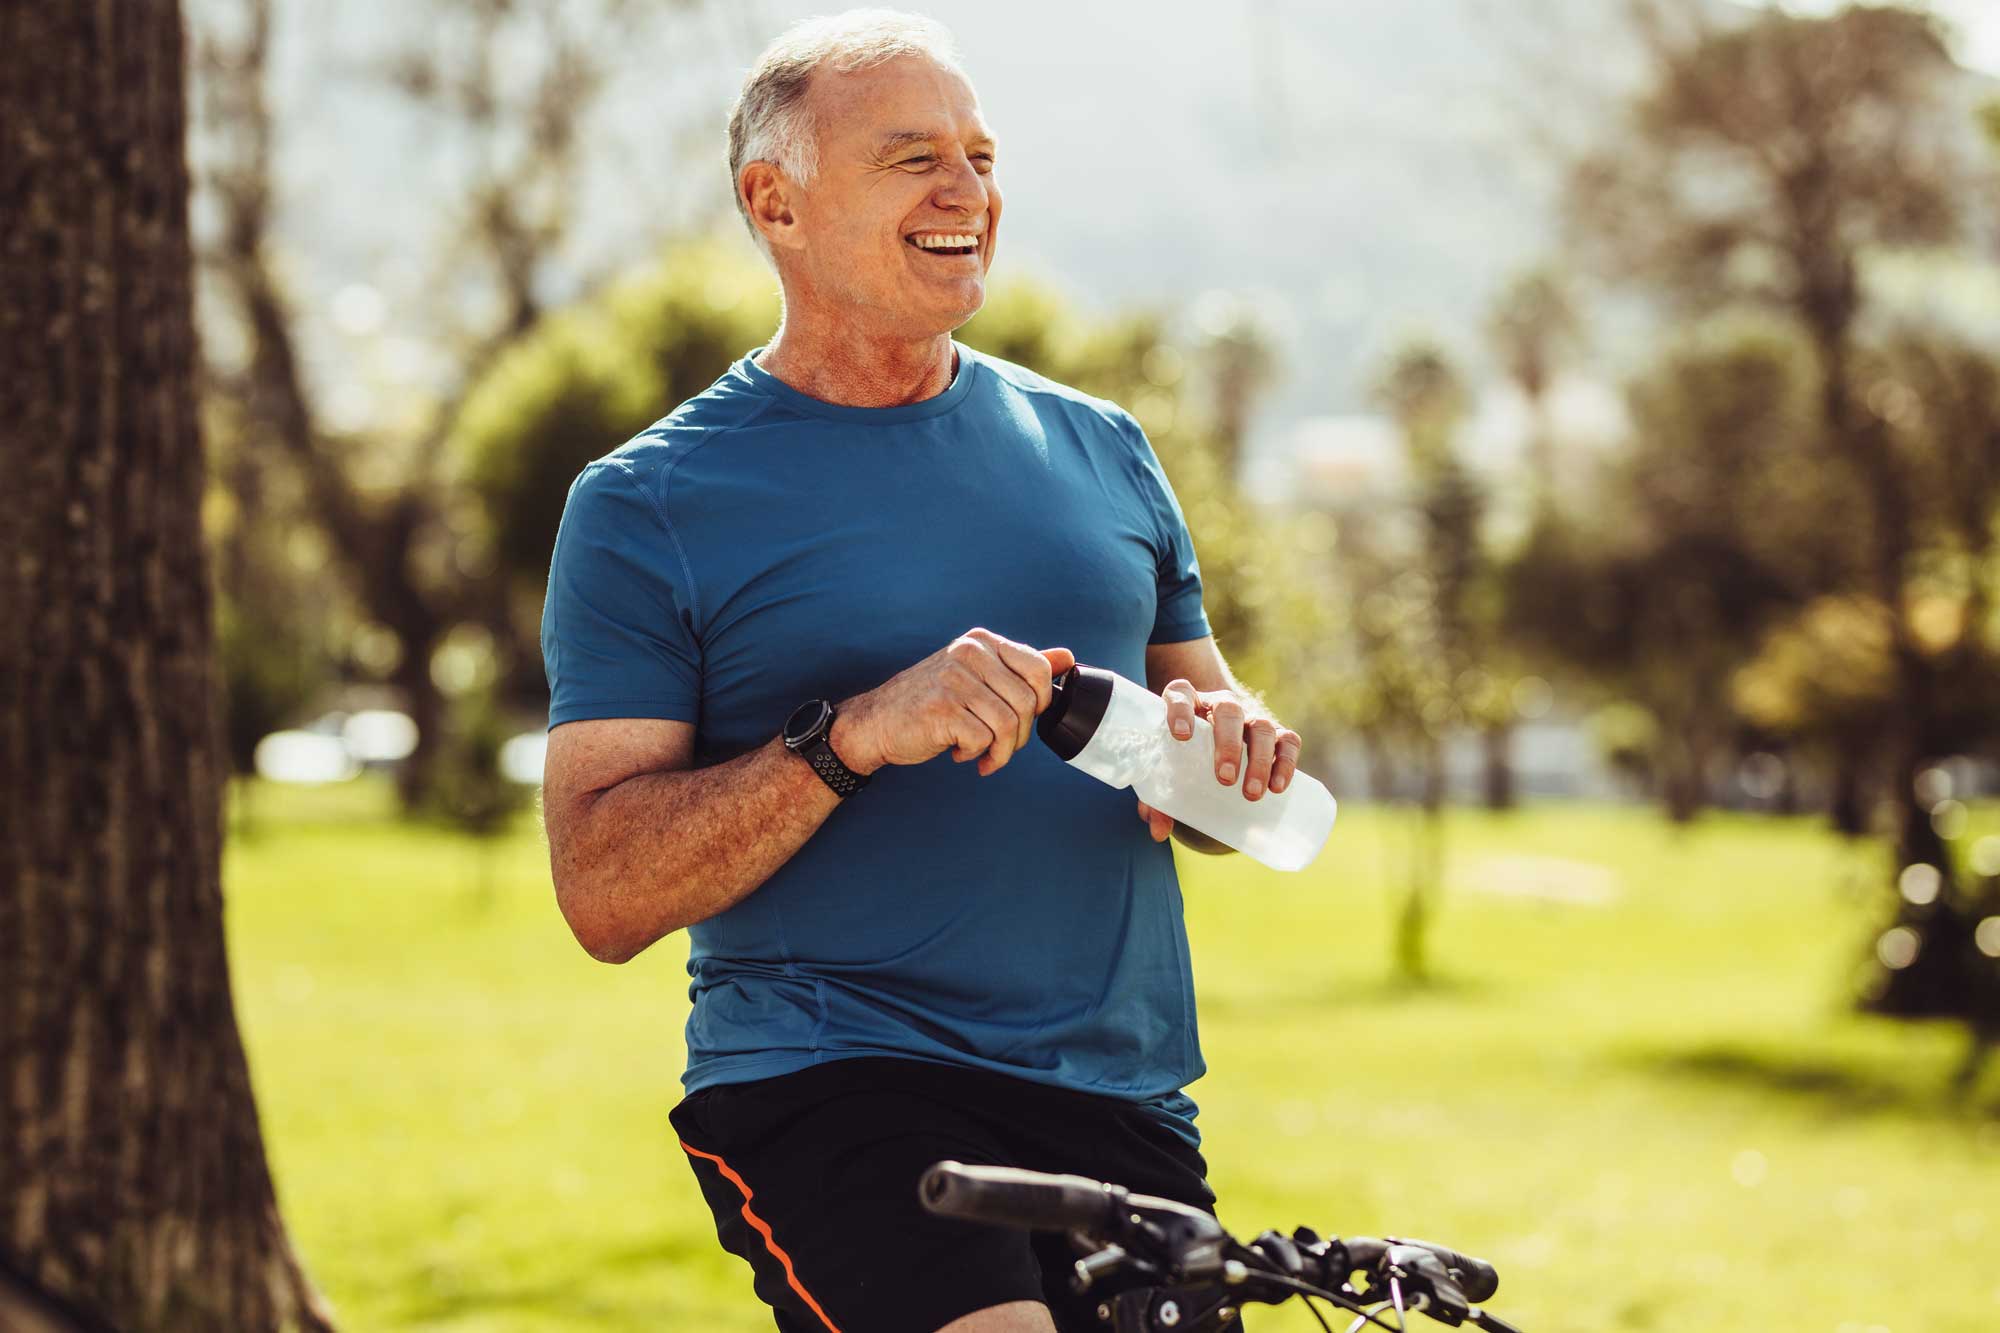 Older man showing a healthy lifestyle, sitting on his bike, smiling